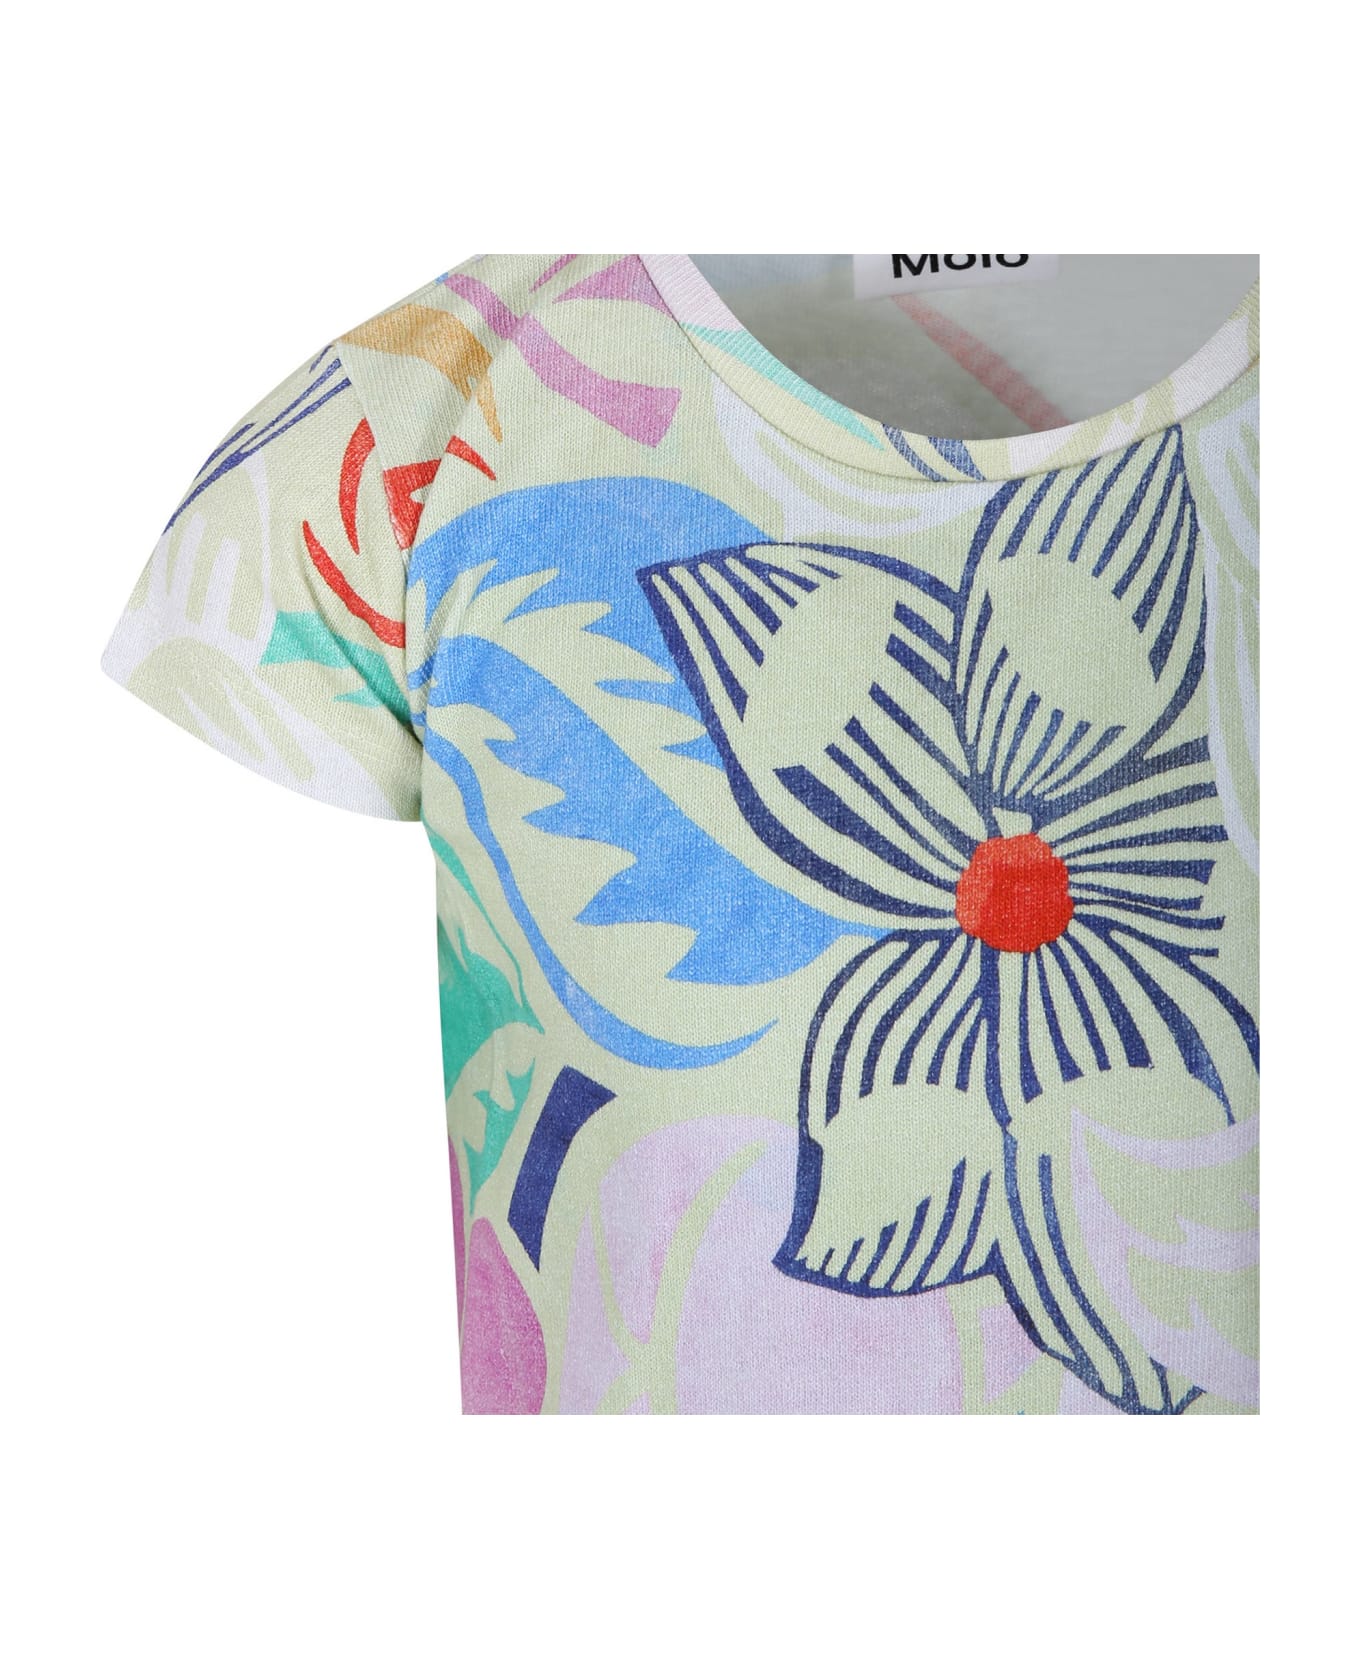 Molo Multicolor T-shirt For Girl With A Floral Pattern - Ivory